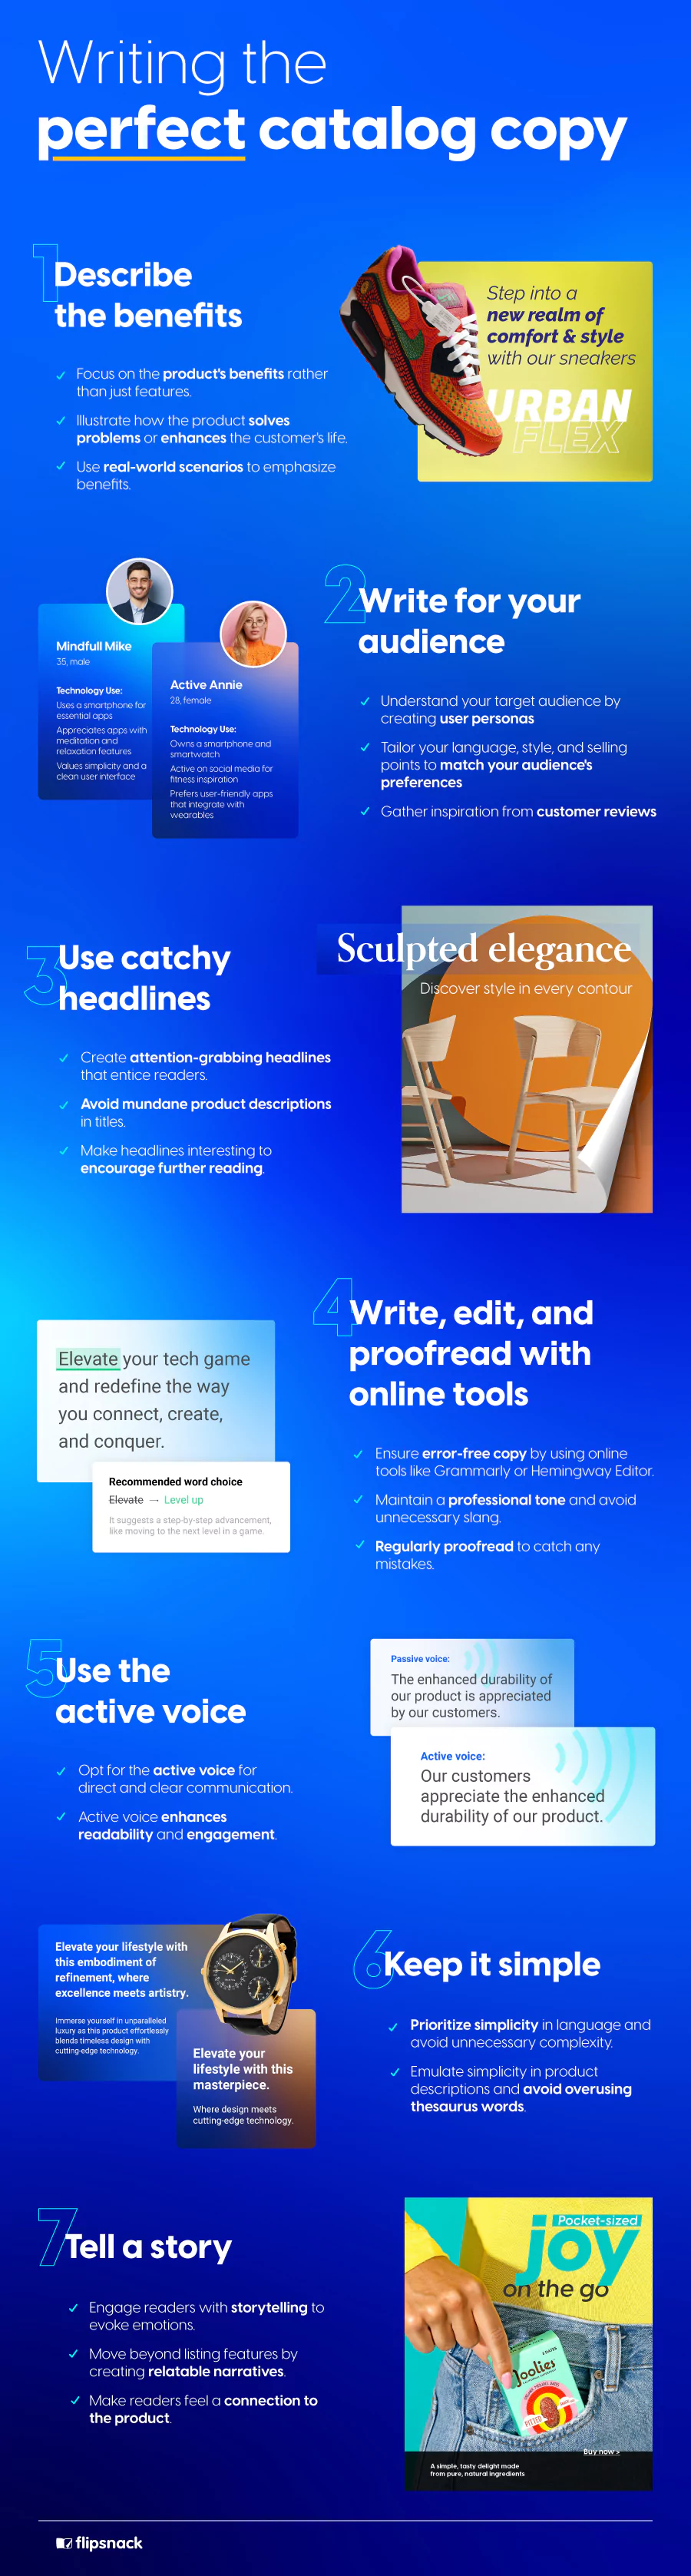 writing the perfect catalog copy infographic